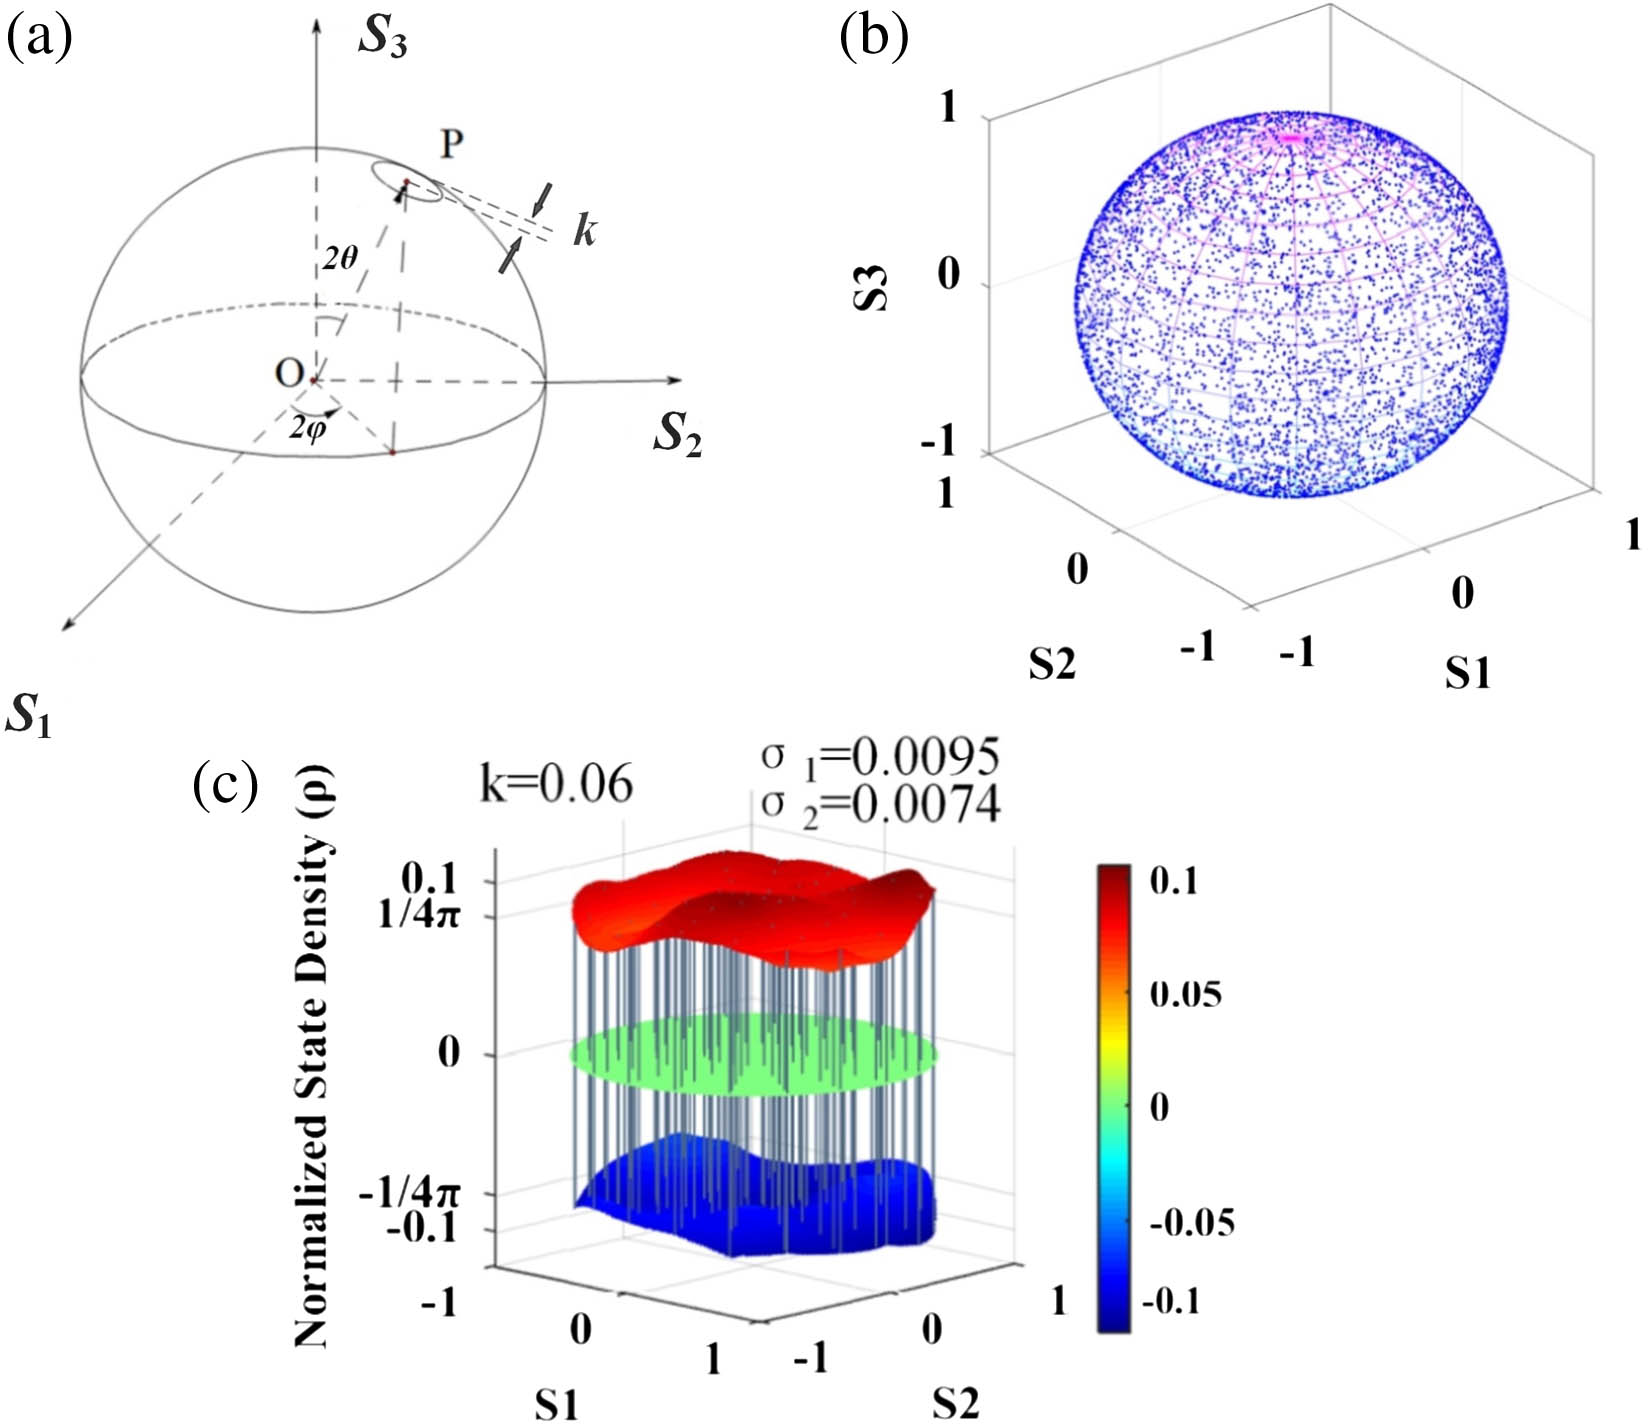 Schematic representation of the DPS statistics: (a) sampling a certain part of the Poincaré sphere for DPS statistics, k, the distance between two center points of the sampling part and its cross section; (b) scrambling simulation results of 10,000 polarization states; (c) complete DPS distribution of the results in (b).